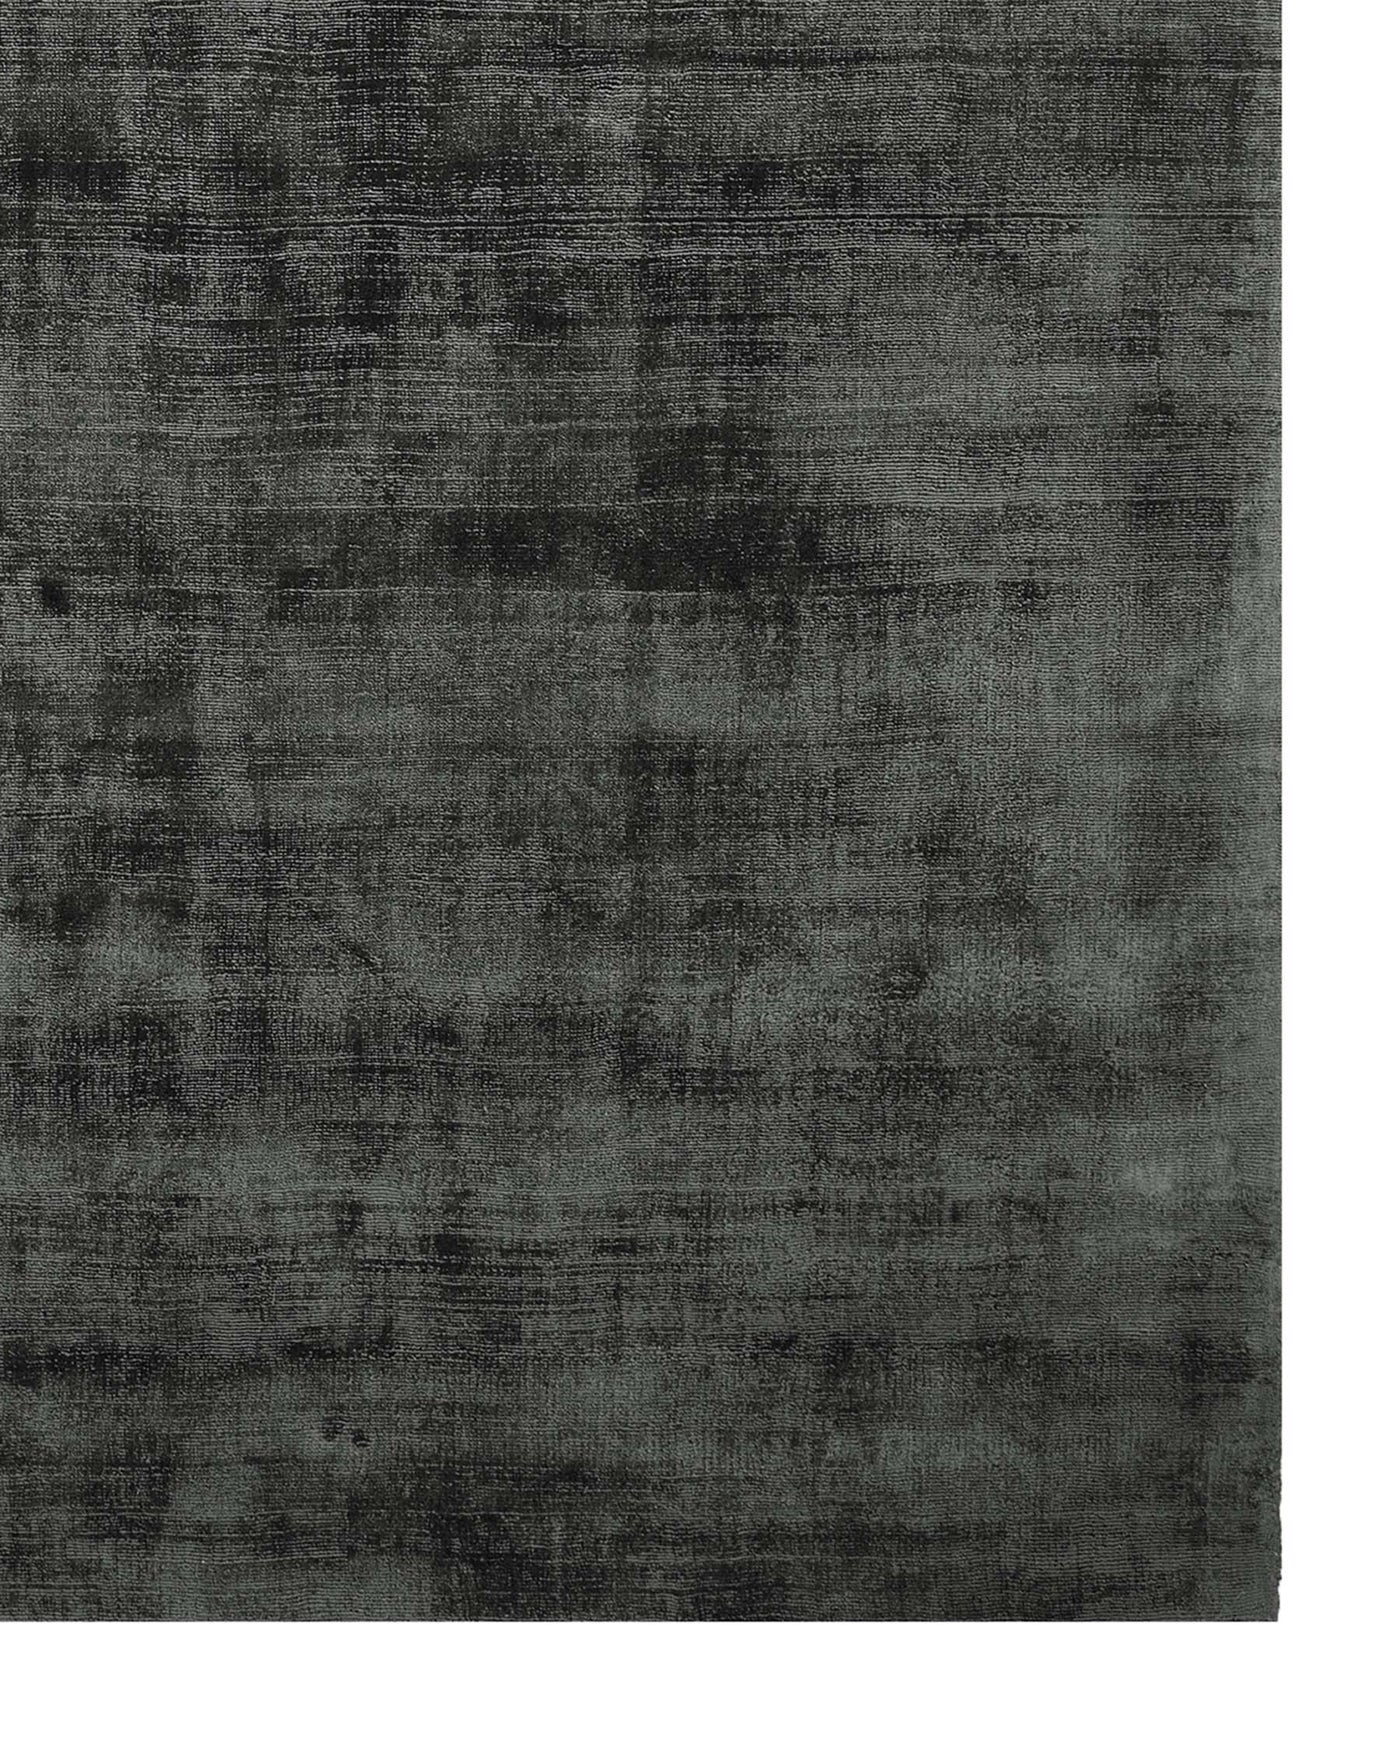 Contemporary distressed-style area rug in varying shades of grey.